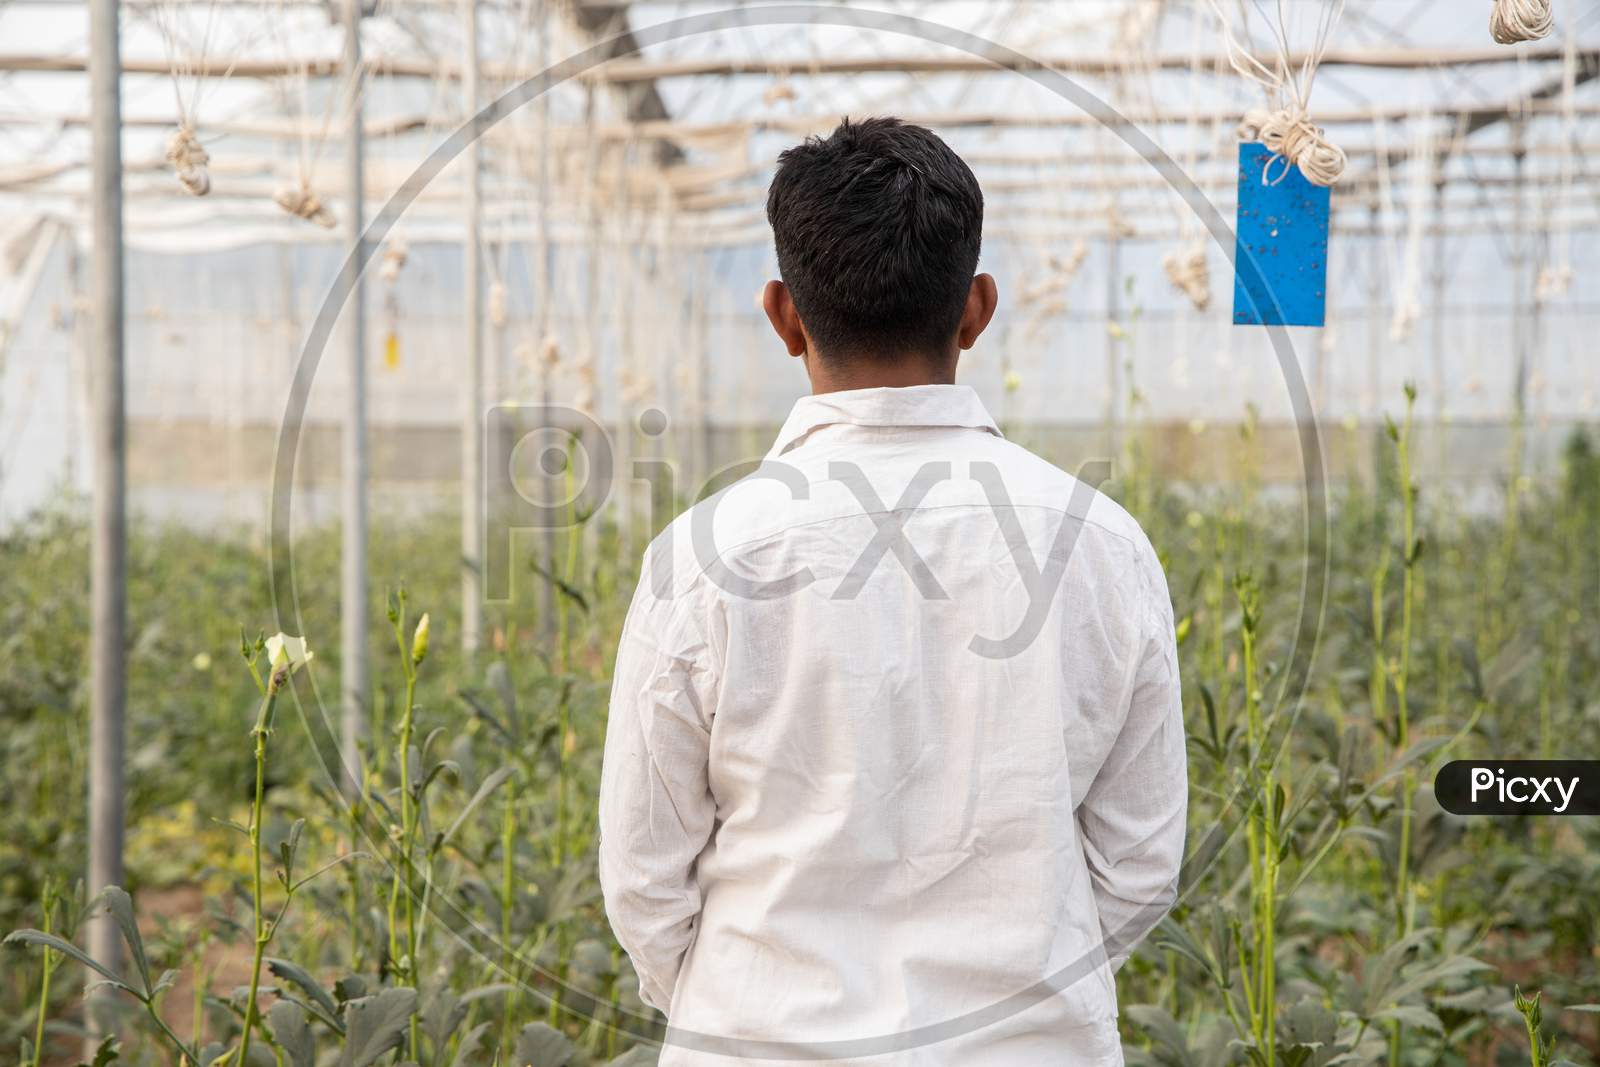 Back View Of Indian Farmer Standing At His Poly House Or Greenhouse, Agriculture Business And Rural Prosperity Concept. Man Wearing White Cloths, Close Up.